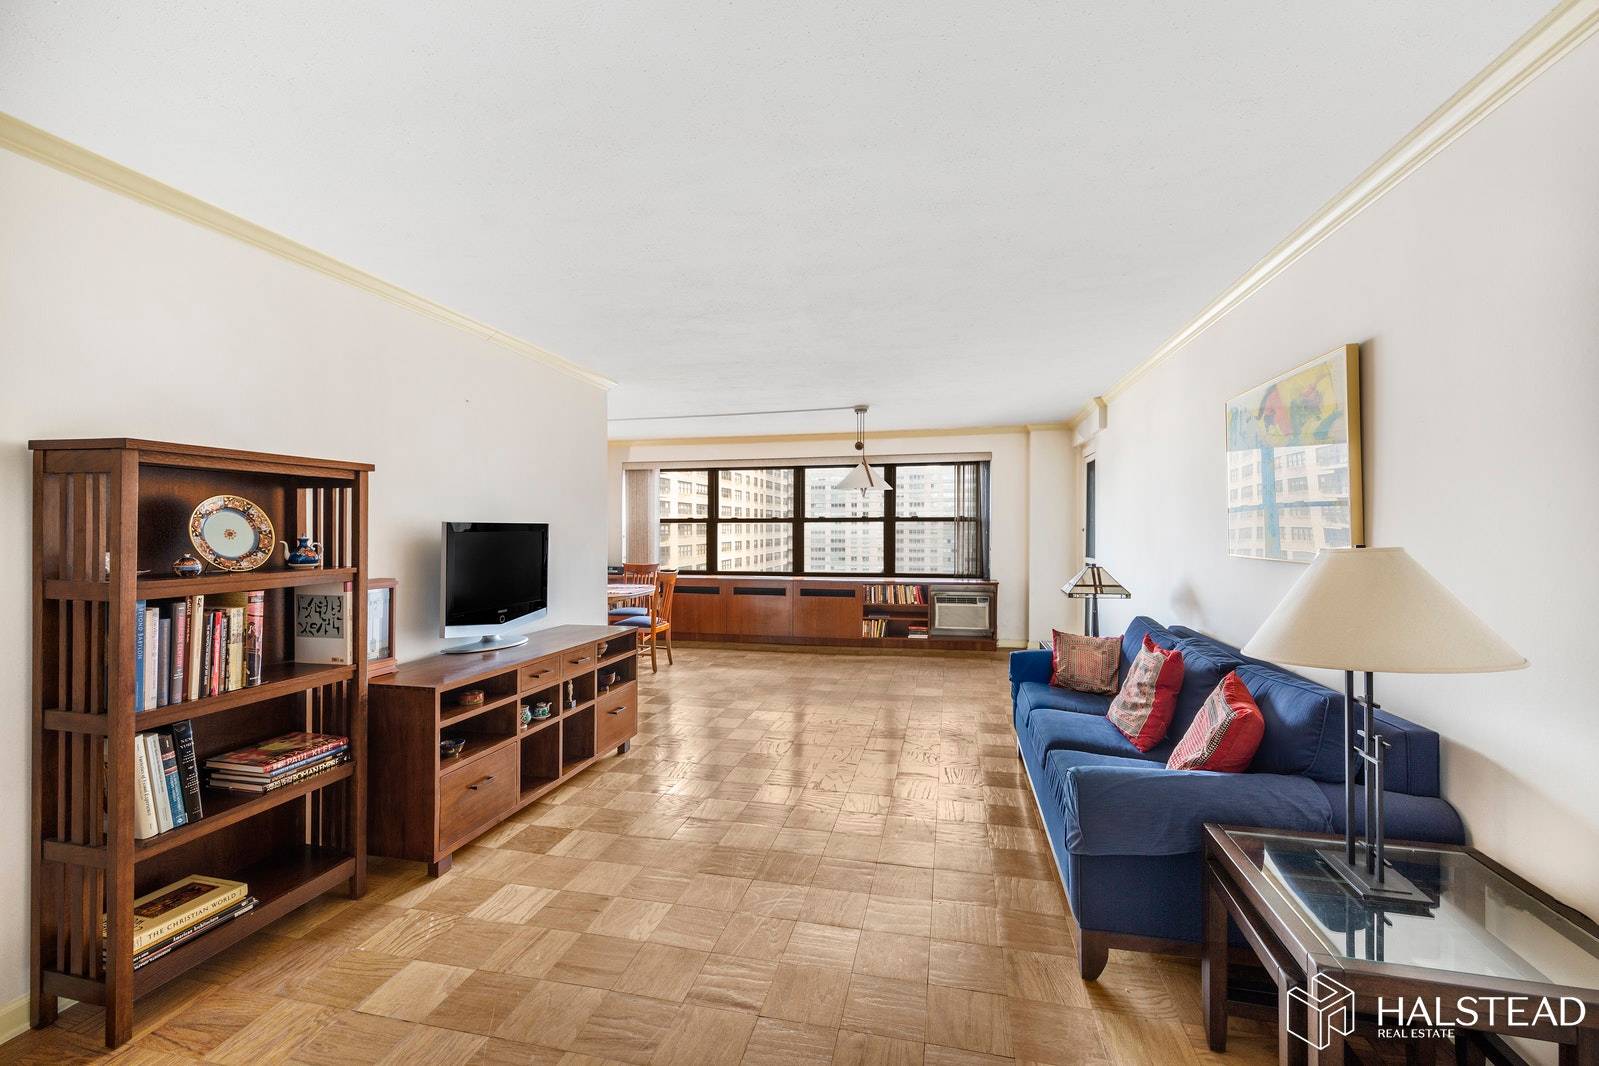 Sunny large one bedroom with a private balcony facing East for outdoor lovers.